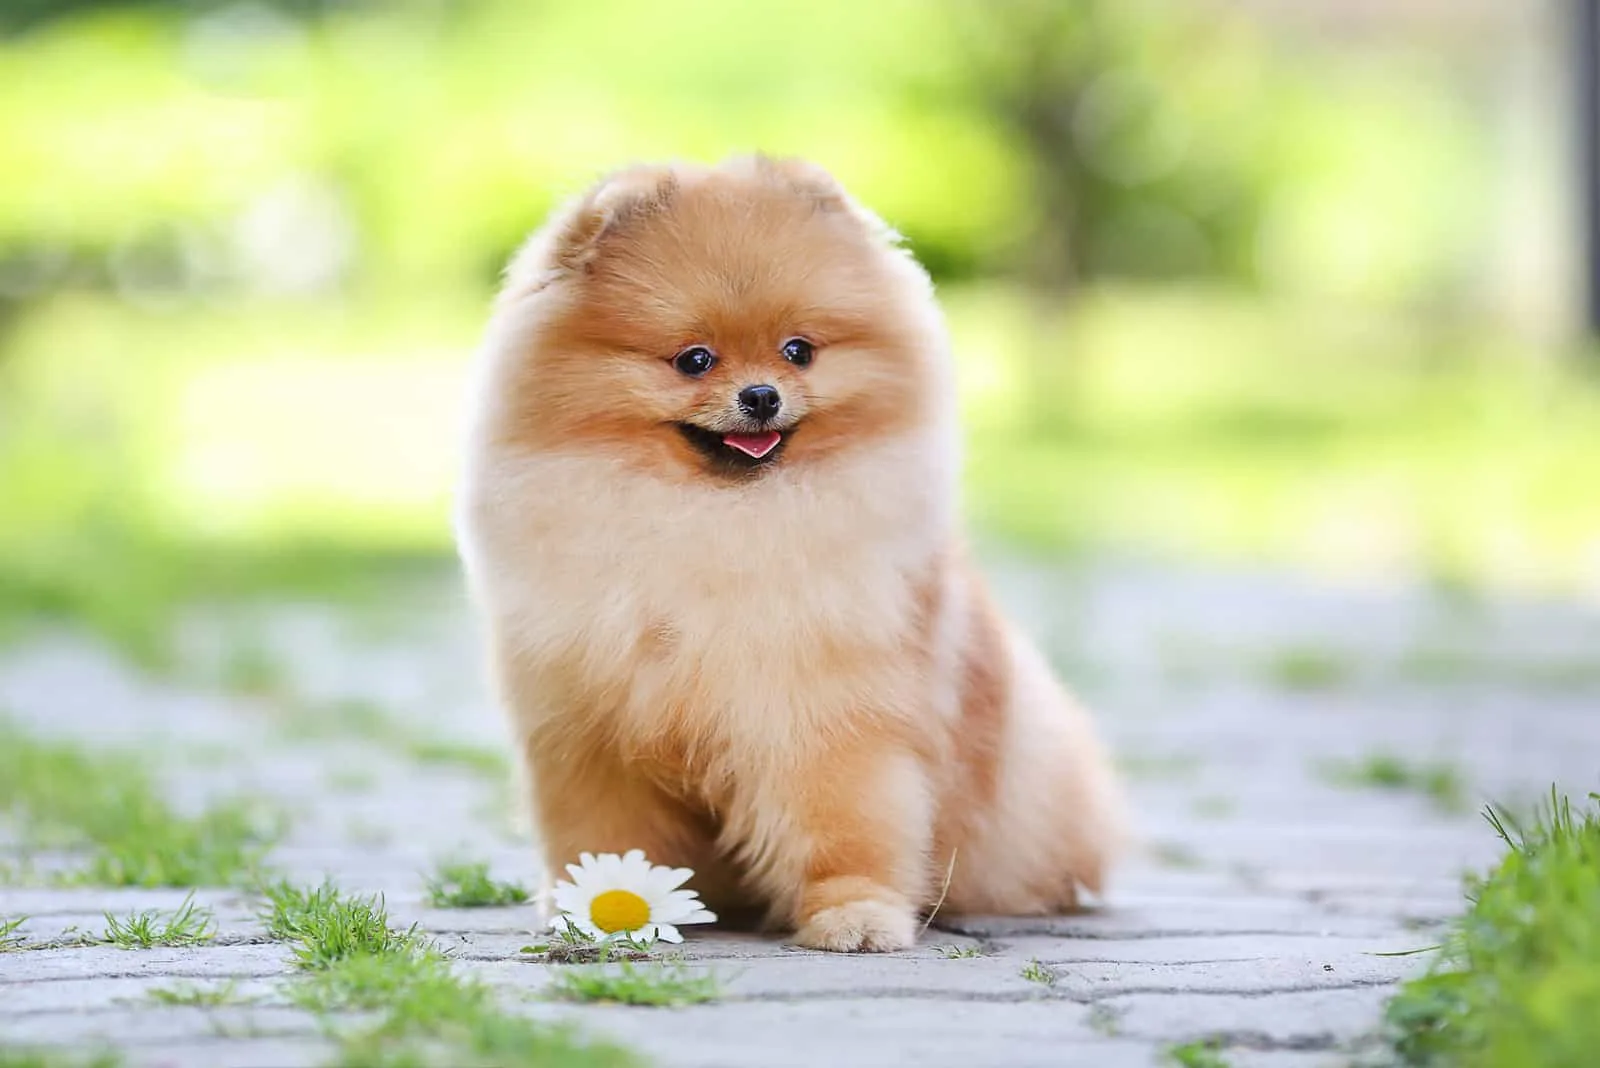 pomeranian puppy sitting outdoor with flower